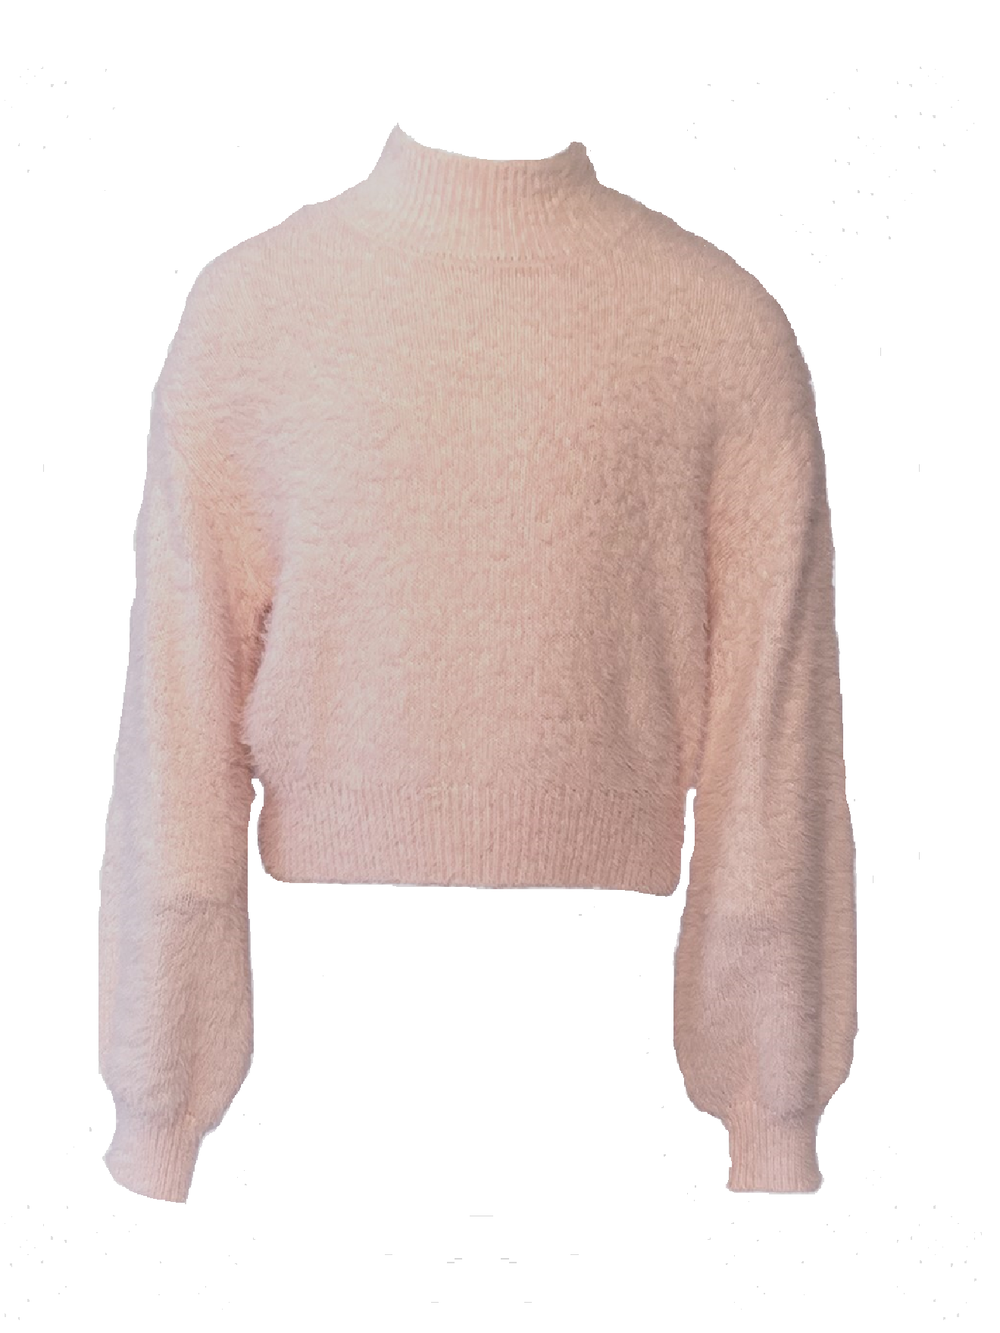 GIRLS BELL SLEEVE KNIT in colour SOFT PINK